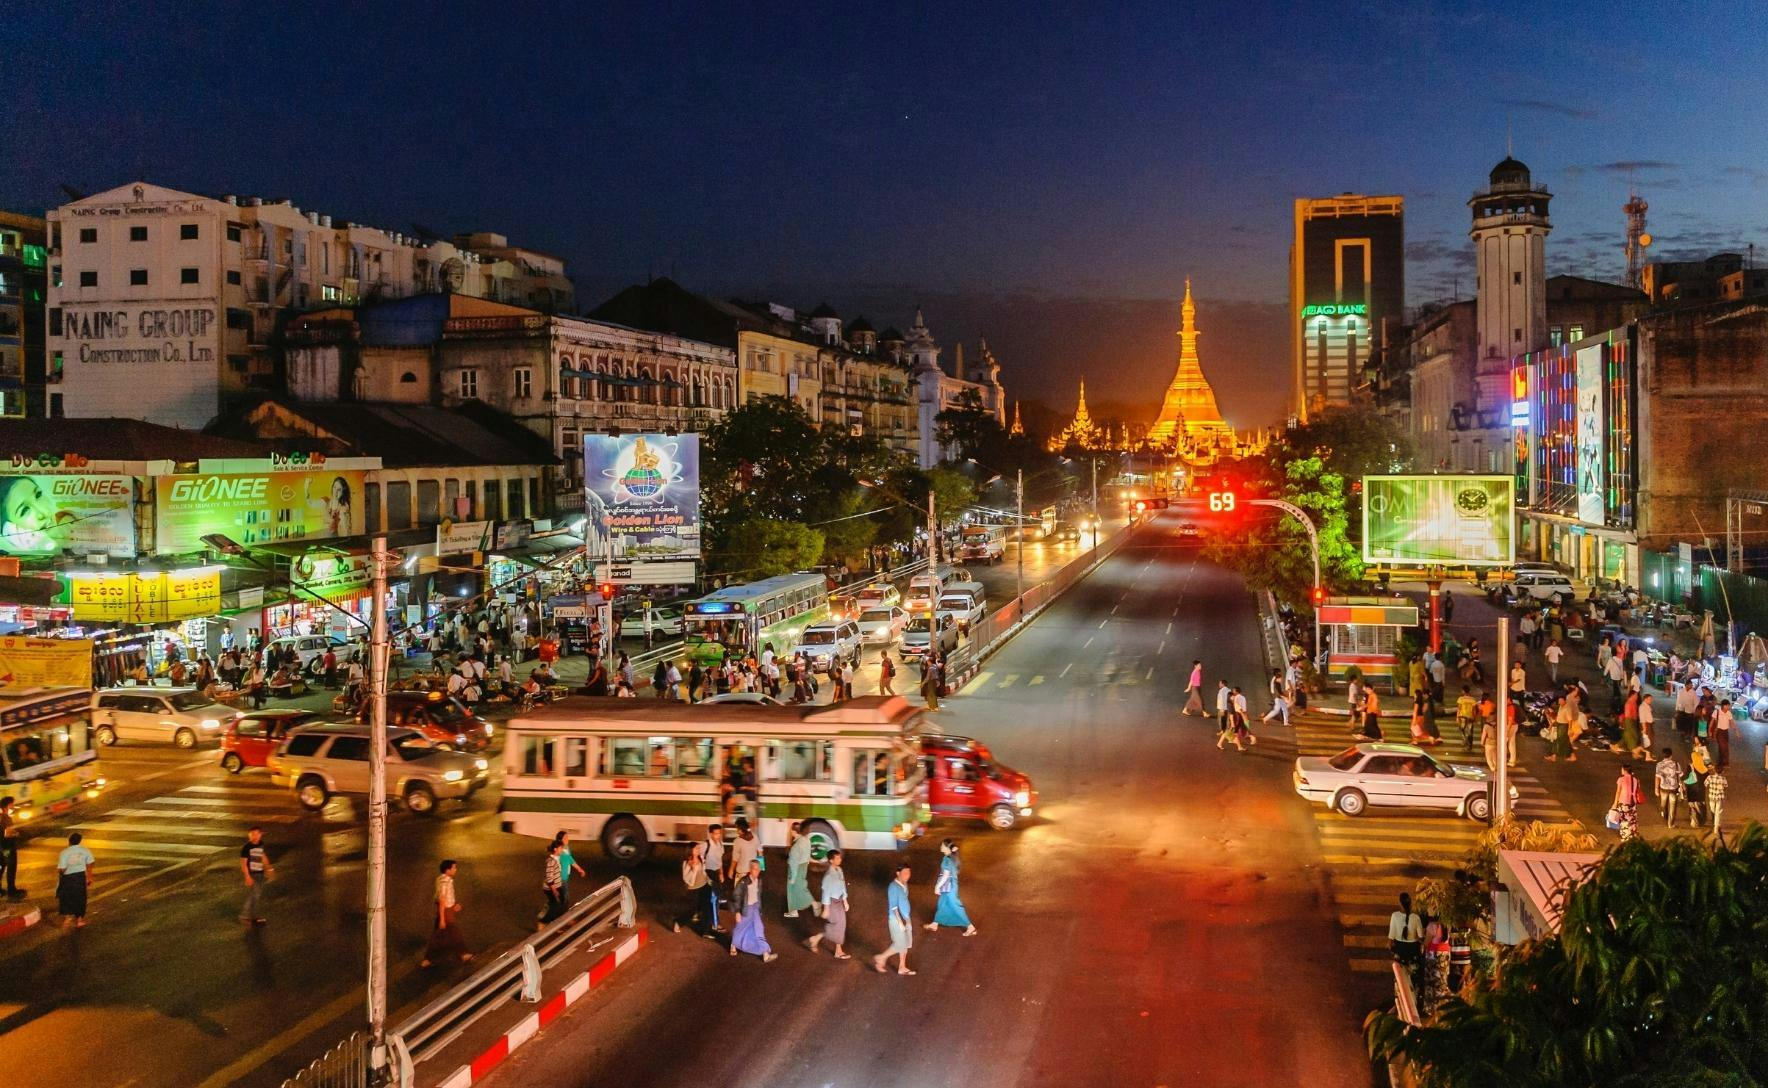 Myanmar street at night. A gold temple is in the background. there are buildings with bright lights and signs lining the streets and cars on the road